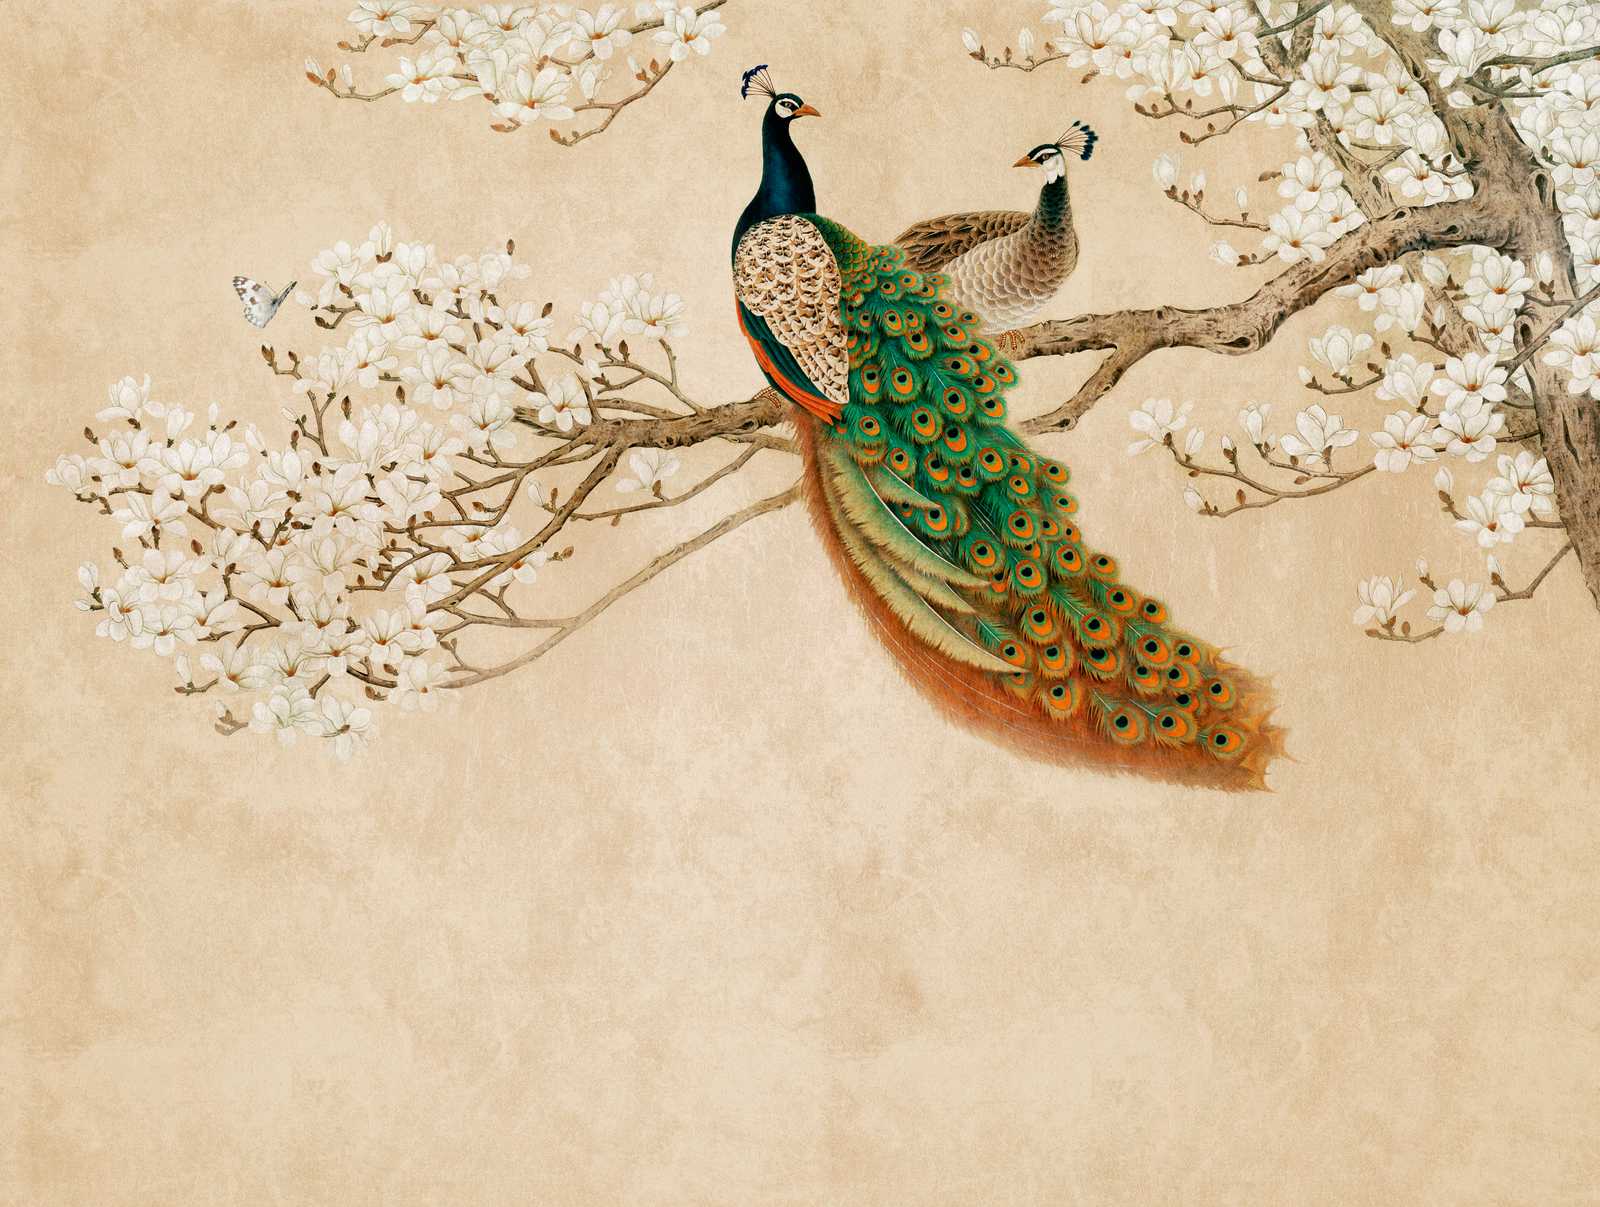             Wallpaper novelty - motif wallpaper cherry blossoms & peacock in Asian style
        